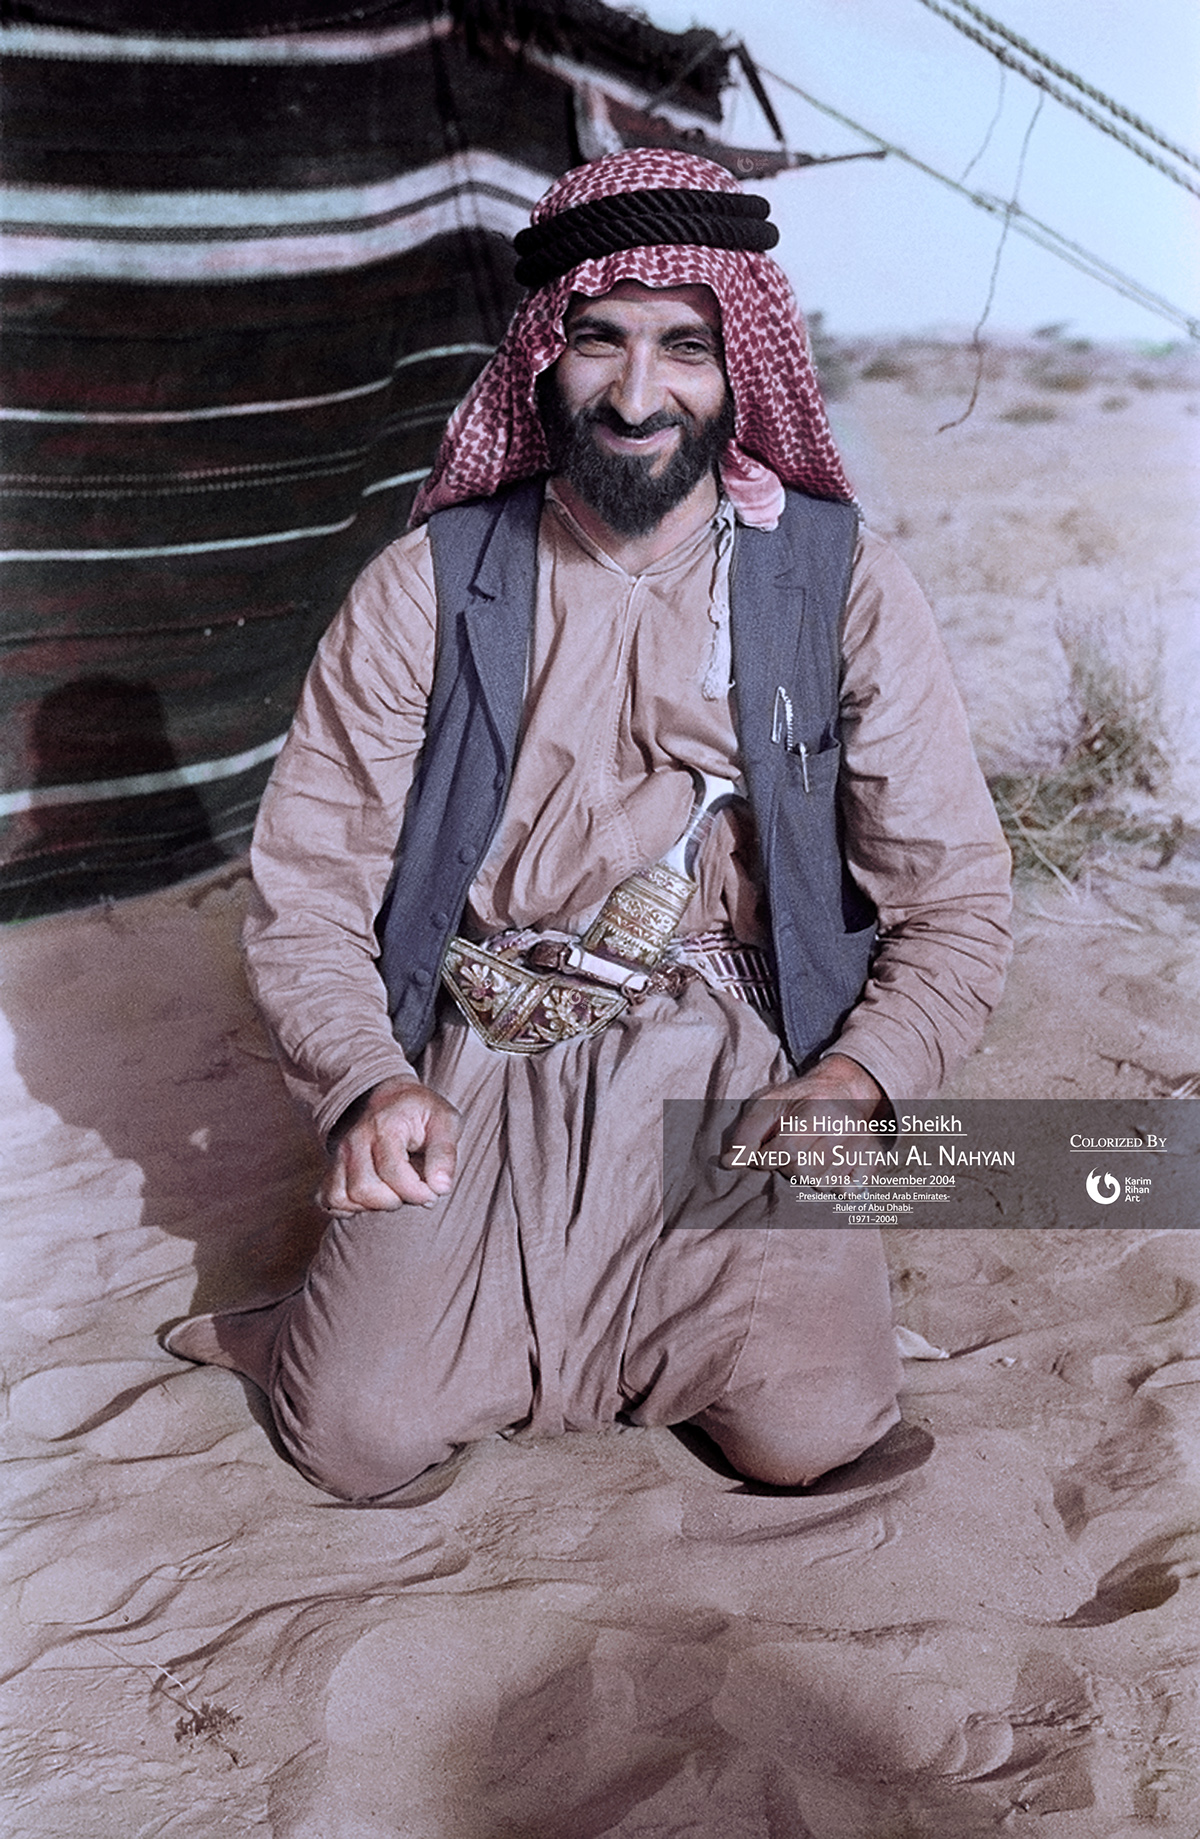 Re-coloring His Highness Sheikh / Zayed Al Nahyan on Behance